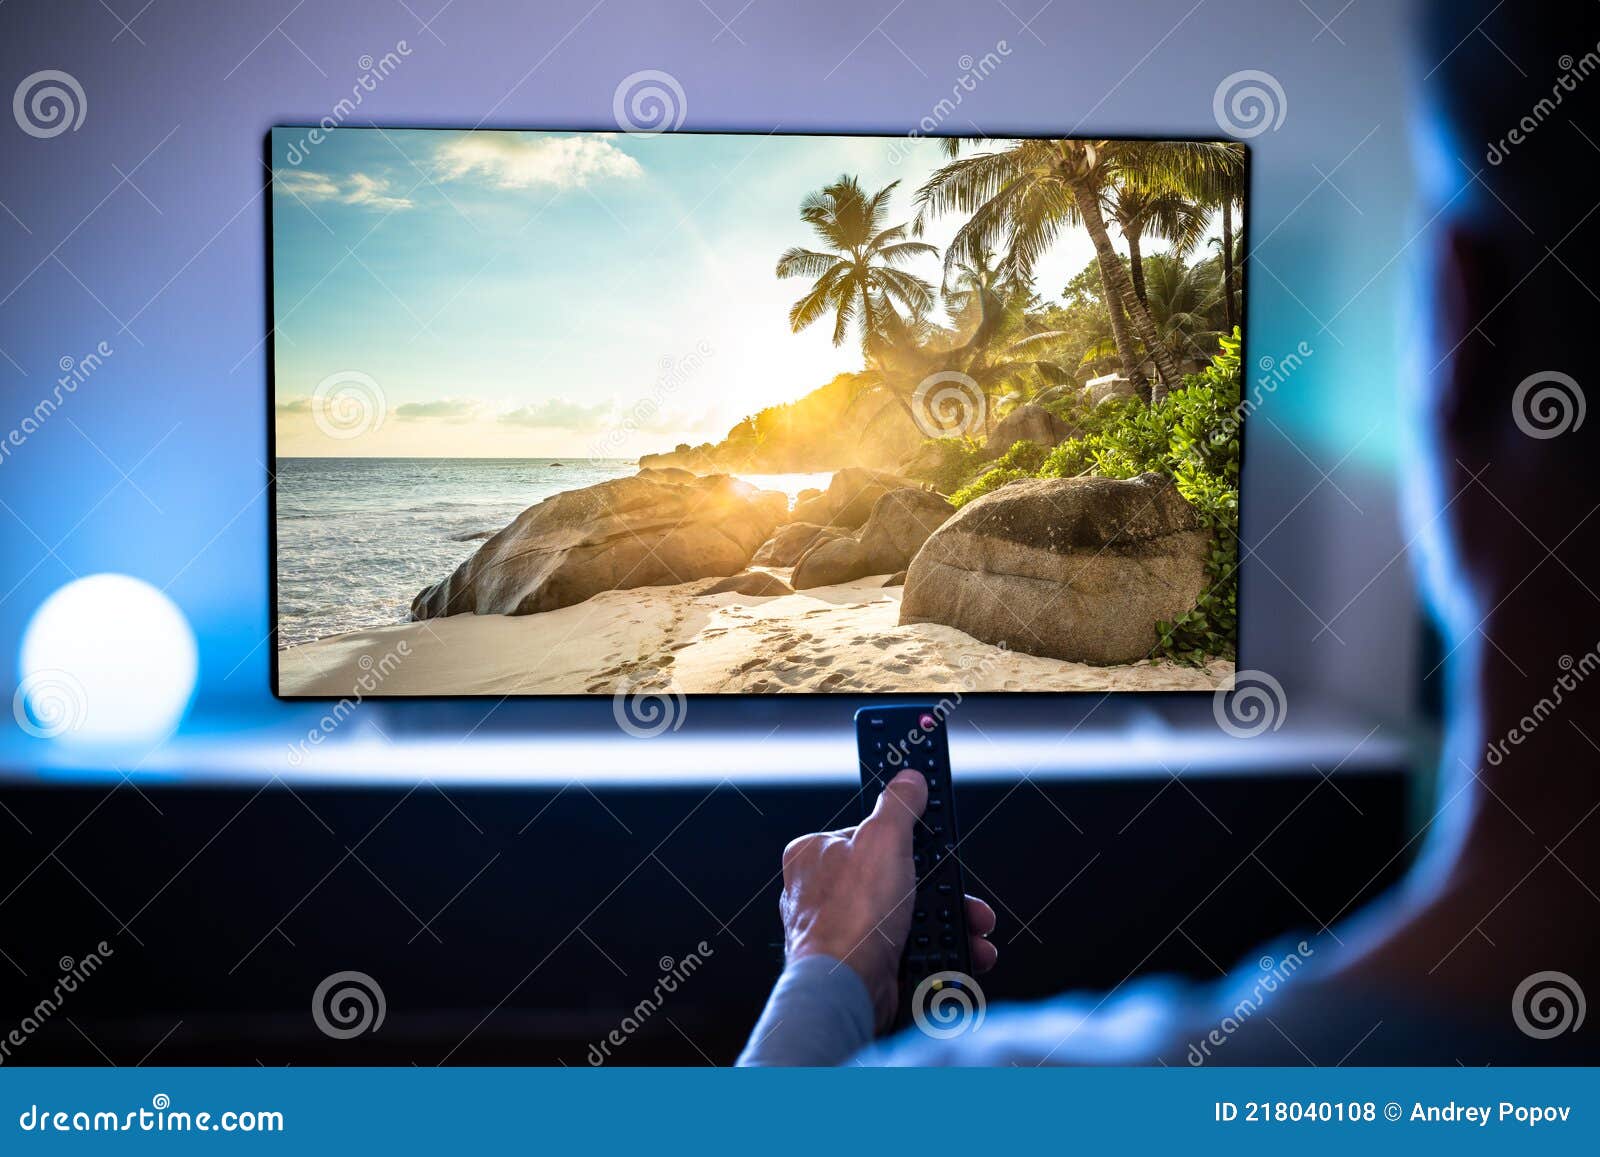 Man Watching Live TV in Room Stock Photo